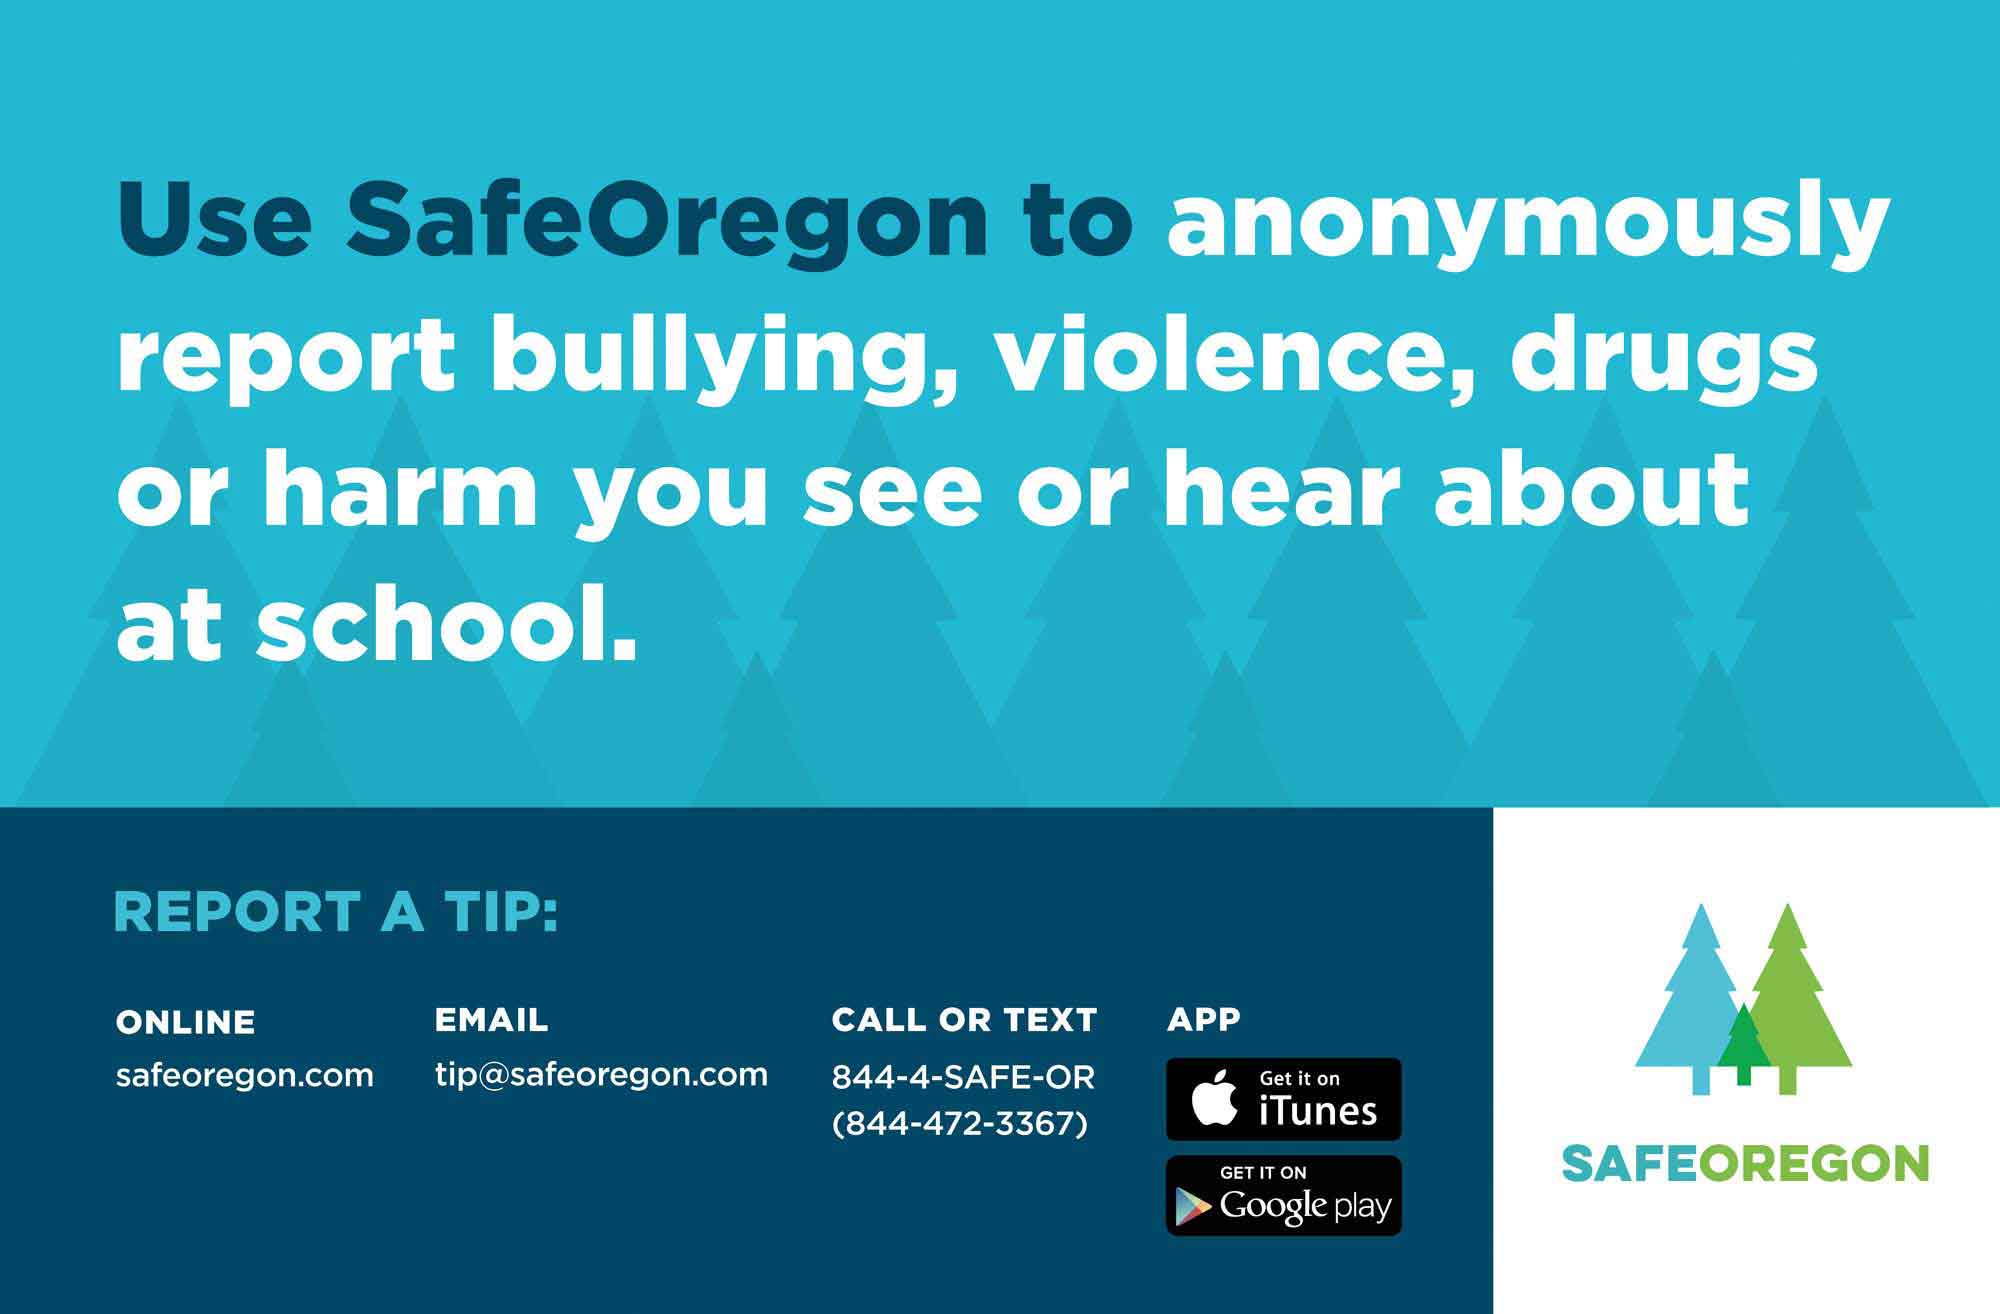 Use SafeOregon to anonymously report bullying, violence, drugs or harm you see or hear about at school.